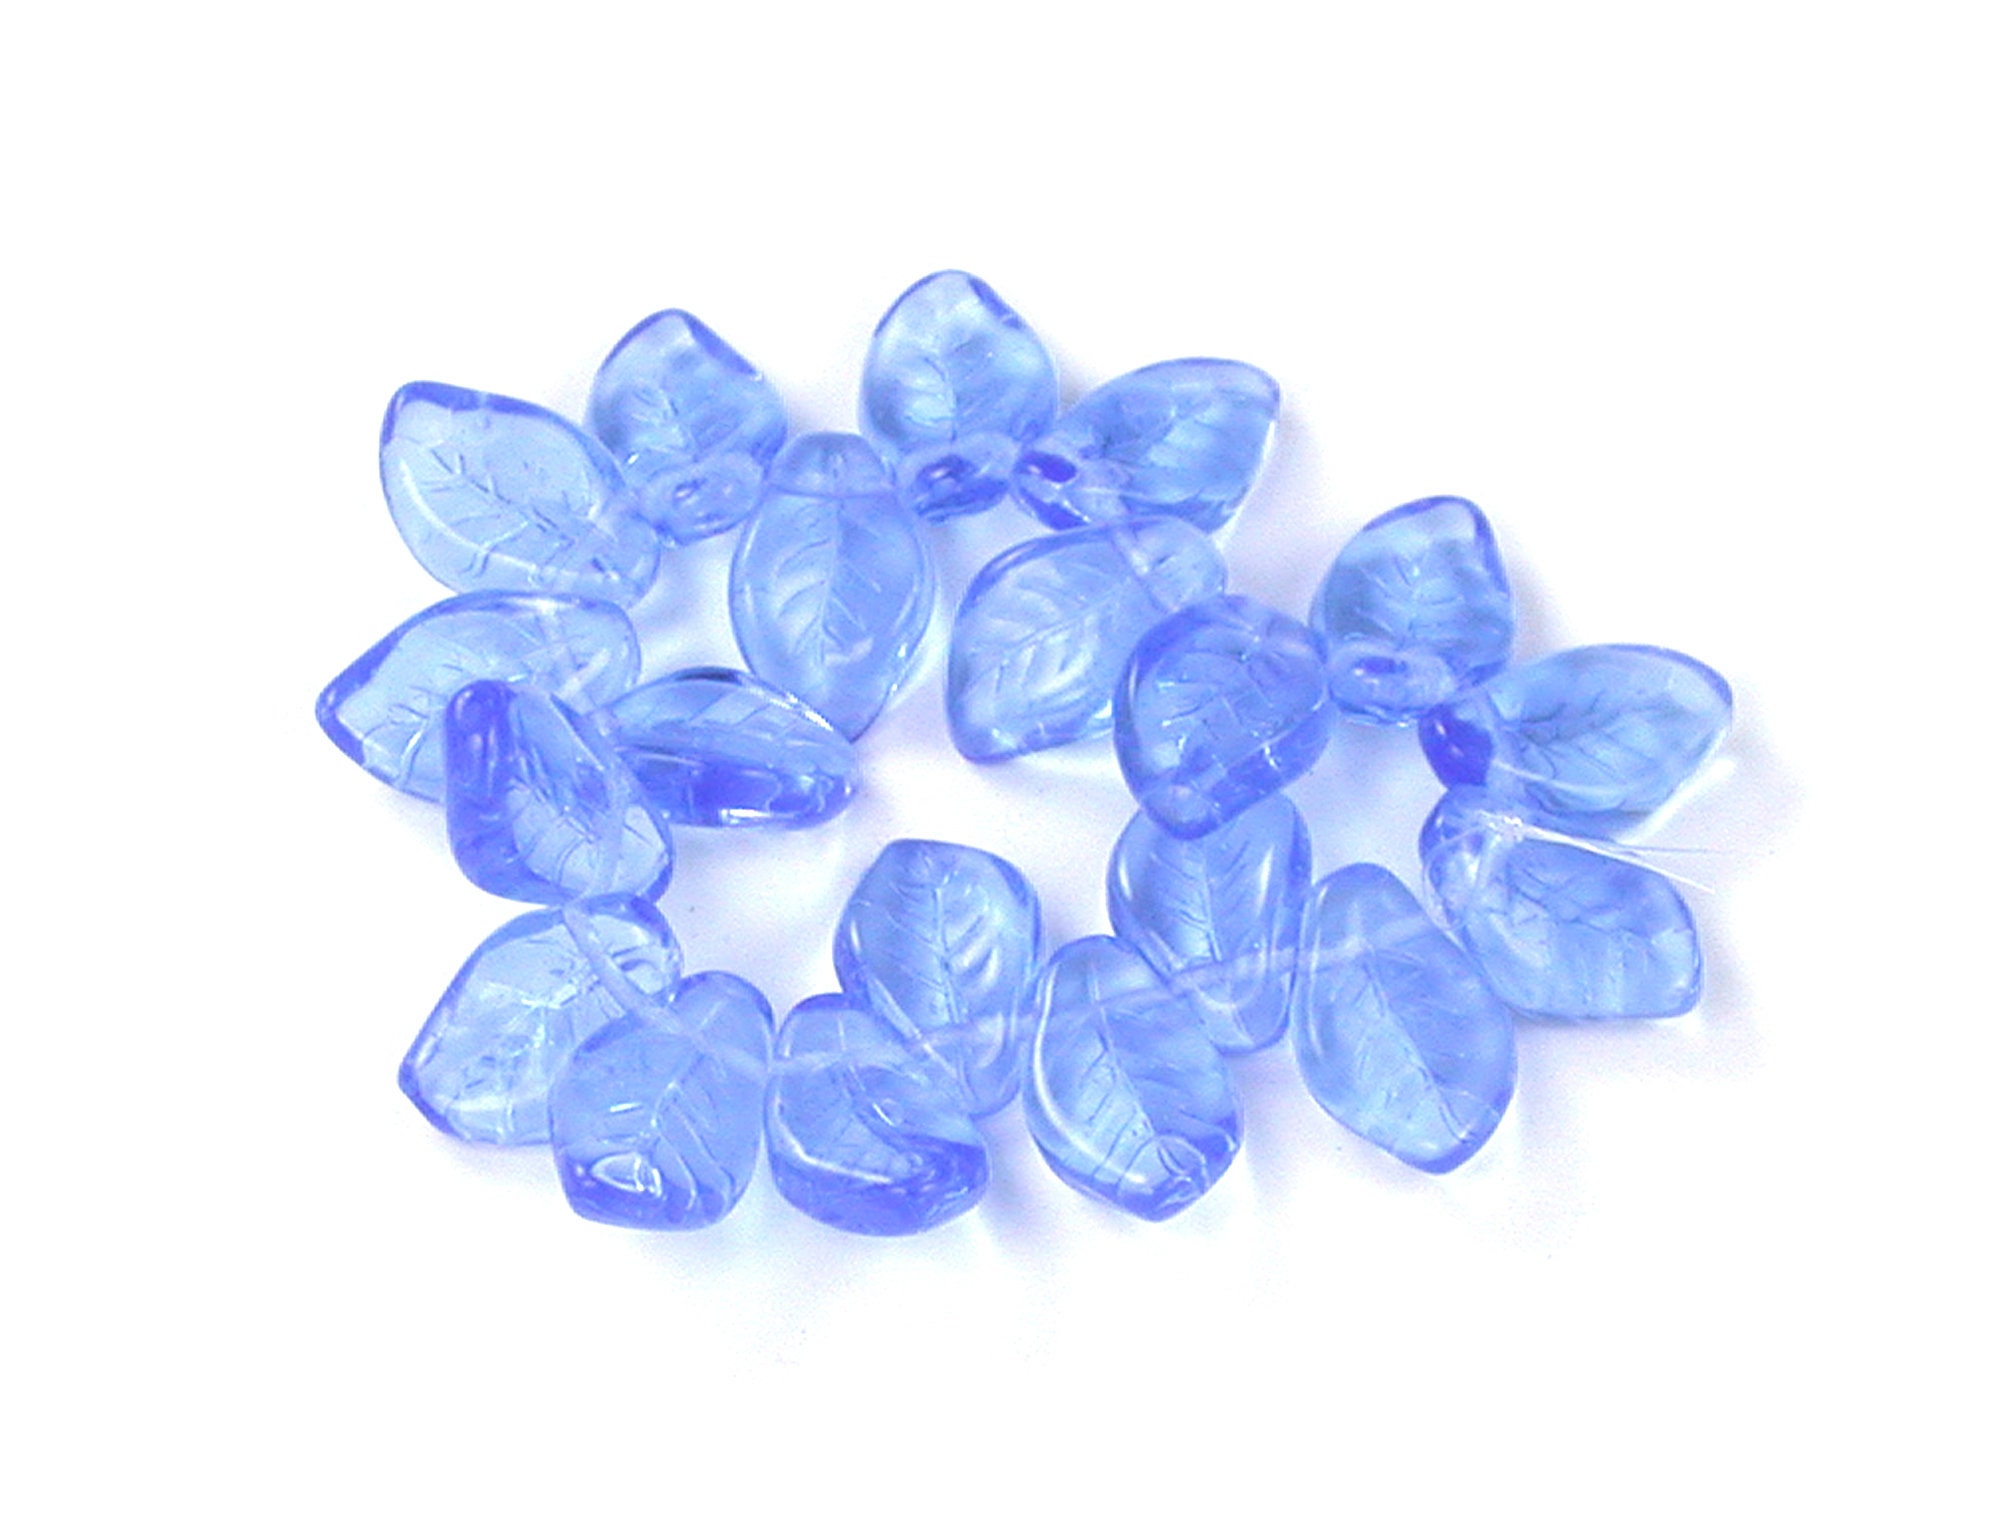 Flat Leaf Bead With Top Hole Czech Glass Leaf Beads Curved Leaf Bead 14mm X  9mm Various Matte Colors Qty 25 or 100 